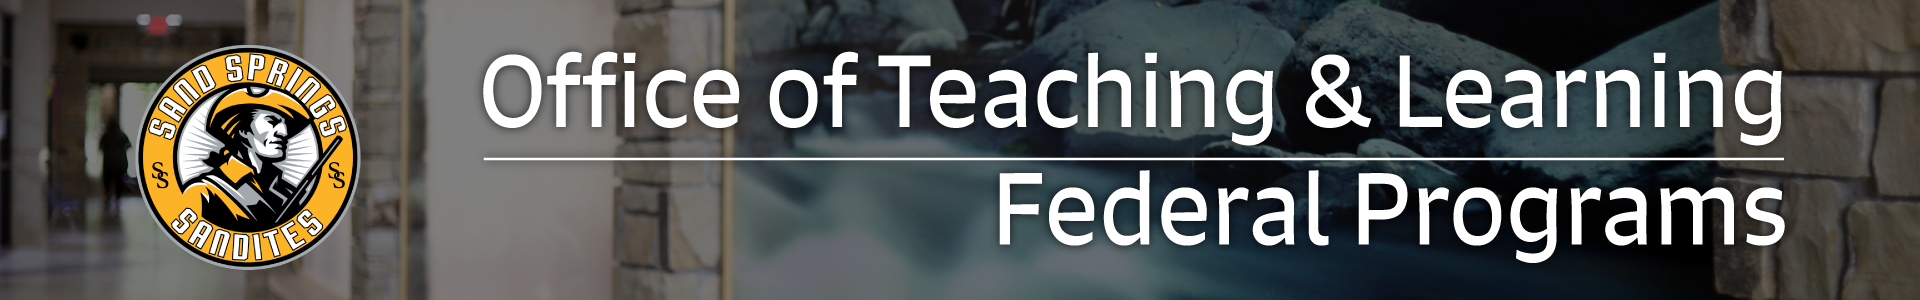 Office of Teaching & Learning/Federal Programs